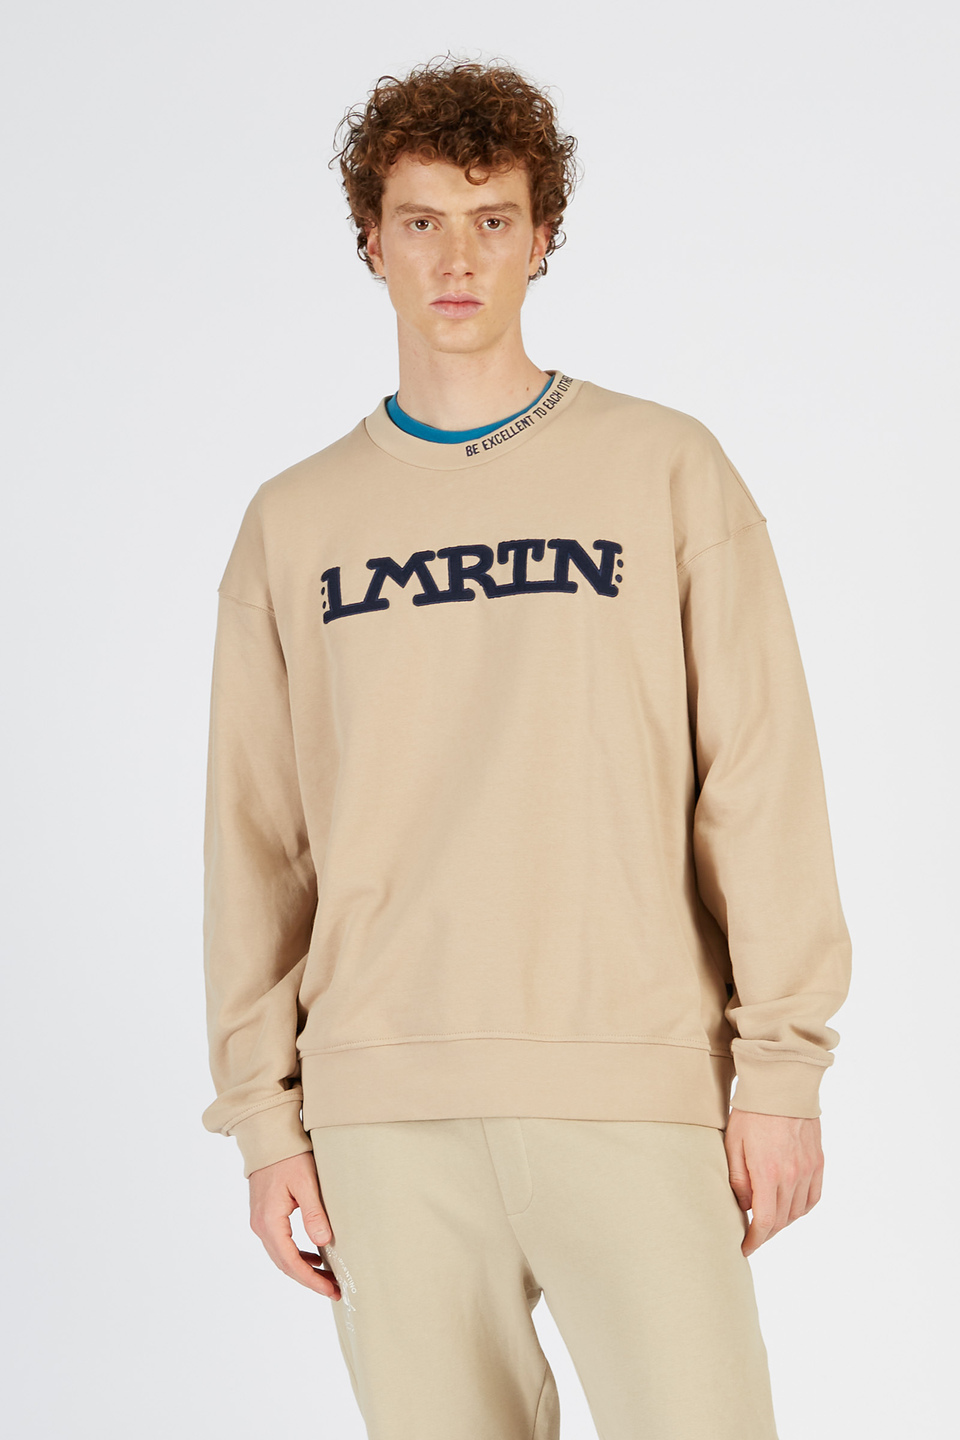 Men's sweatshirt in 100% cotton with long sleeves, oversized fit | La Martina - Official Online Shop